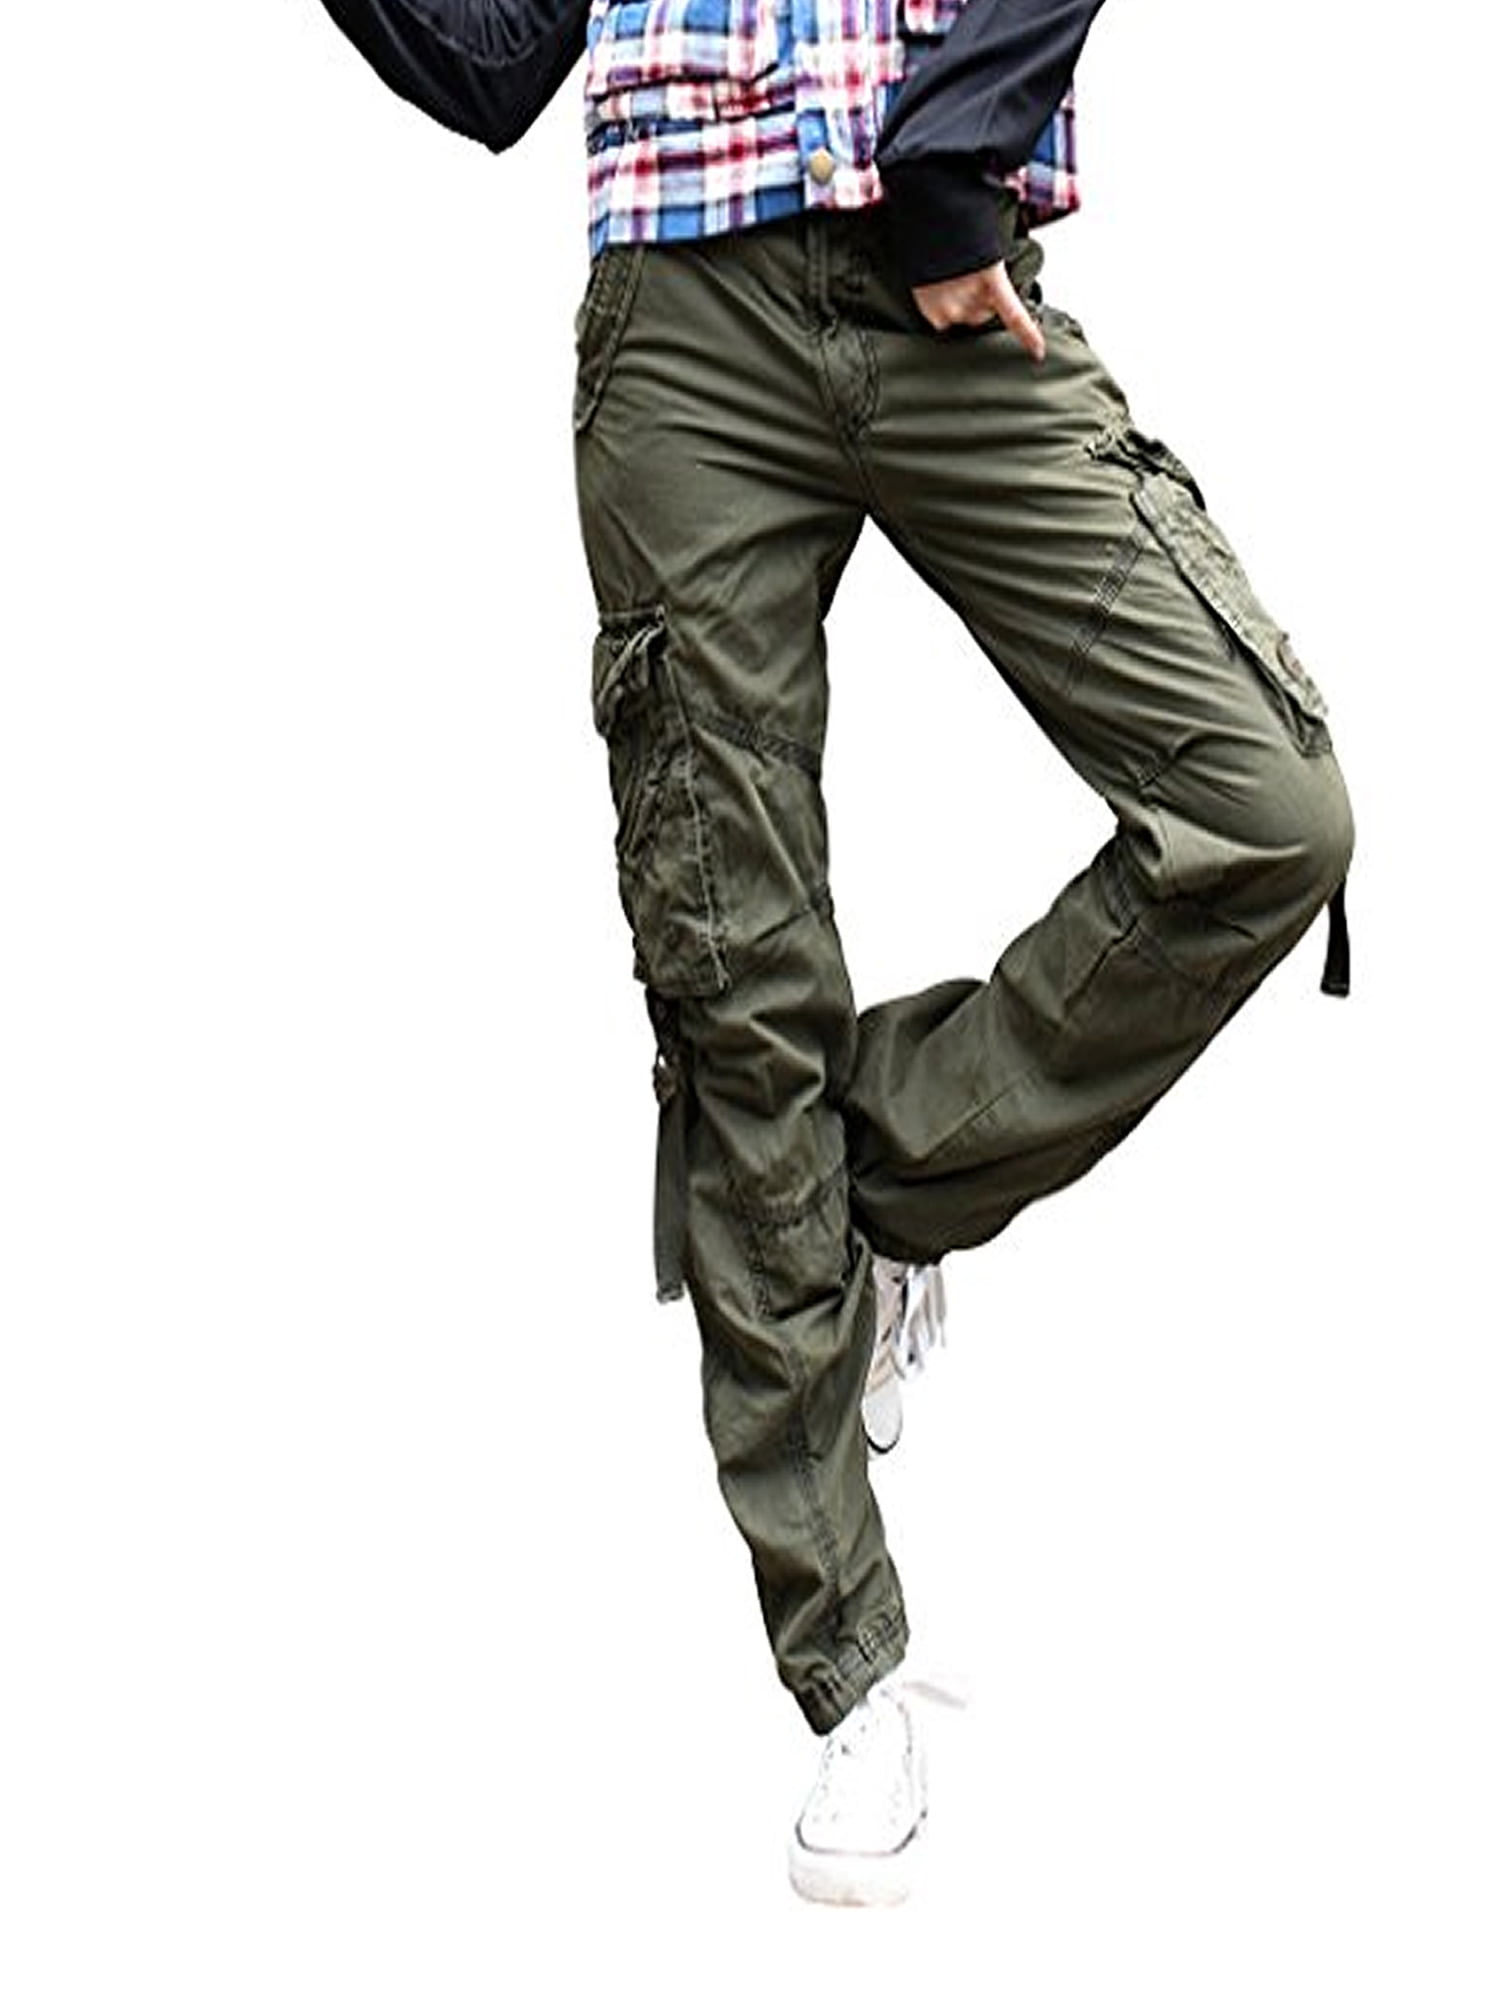 Skylinewears Women’s Tactical Pant 100% Cotton Camping Hiking Army ...